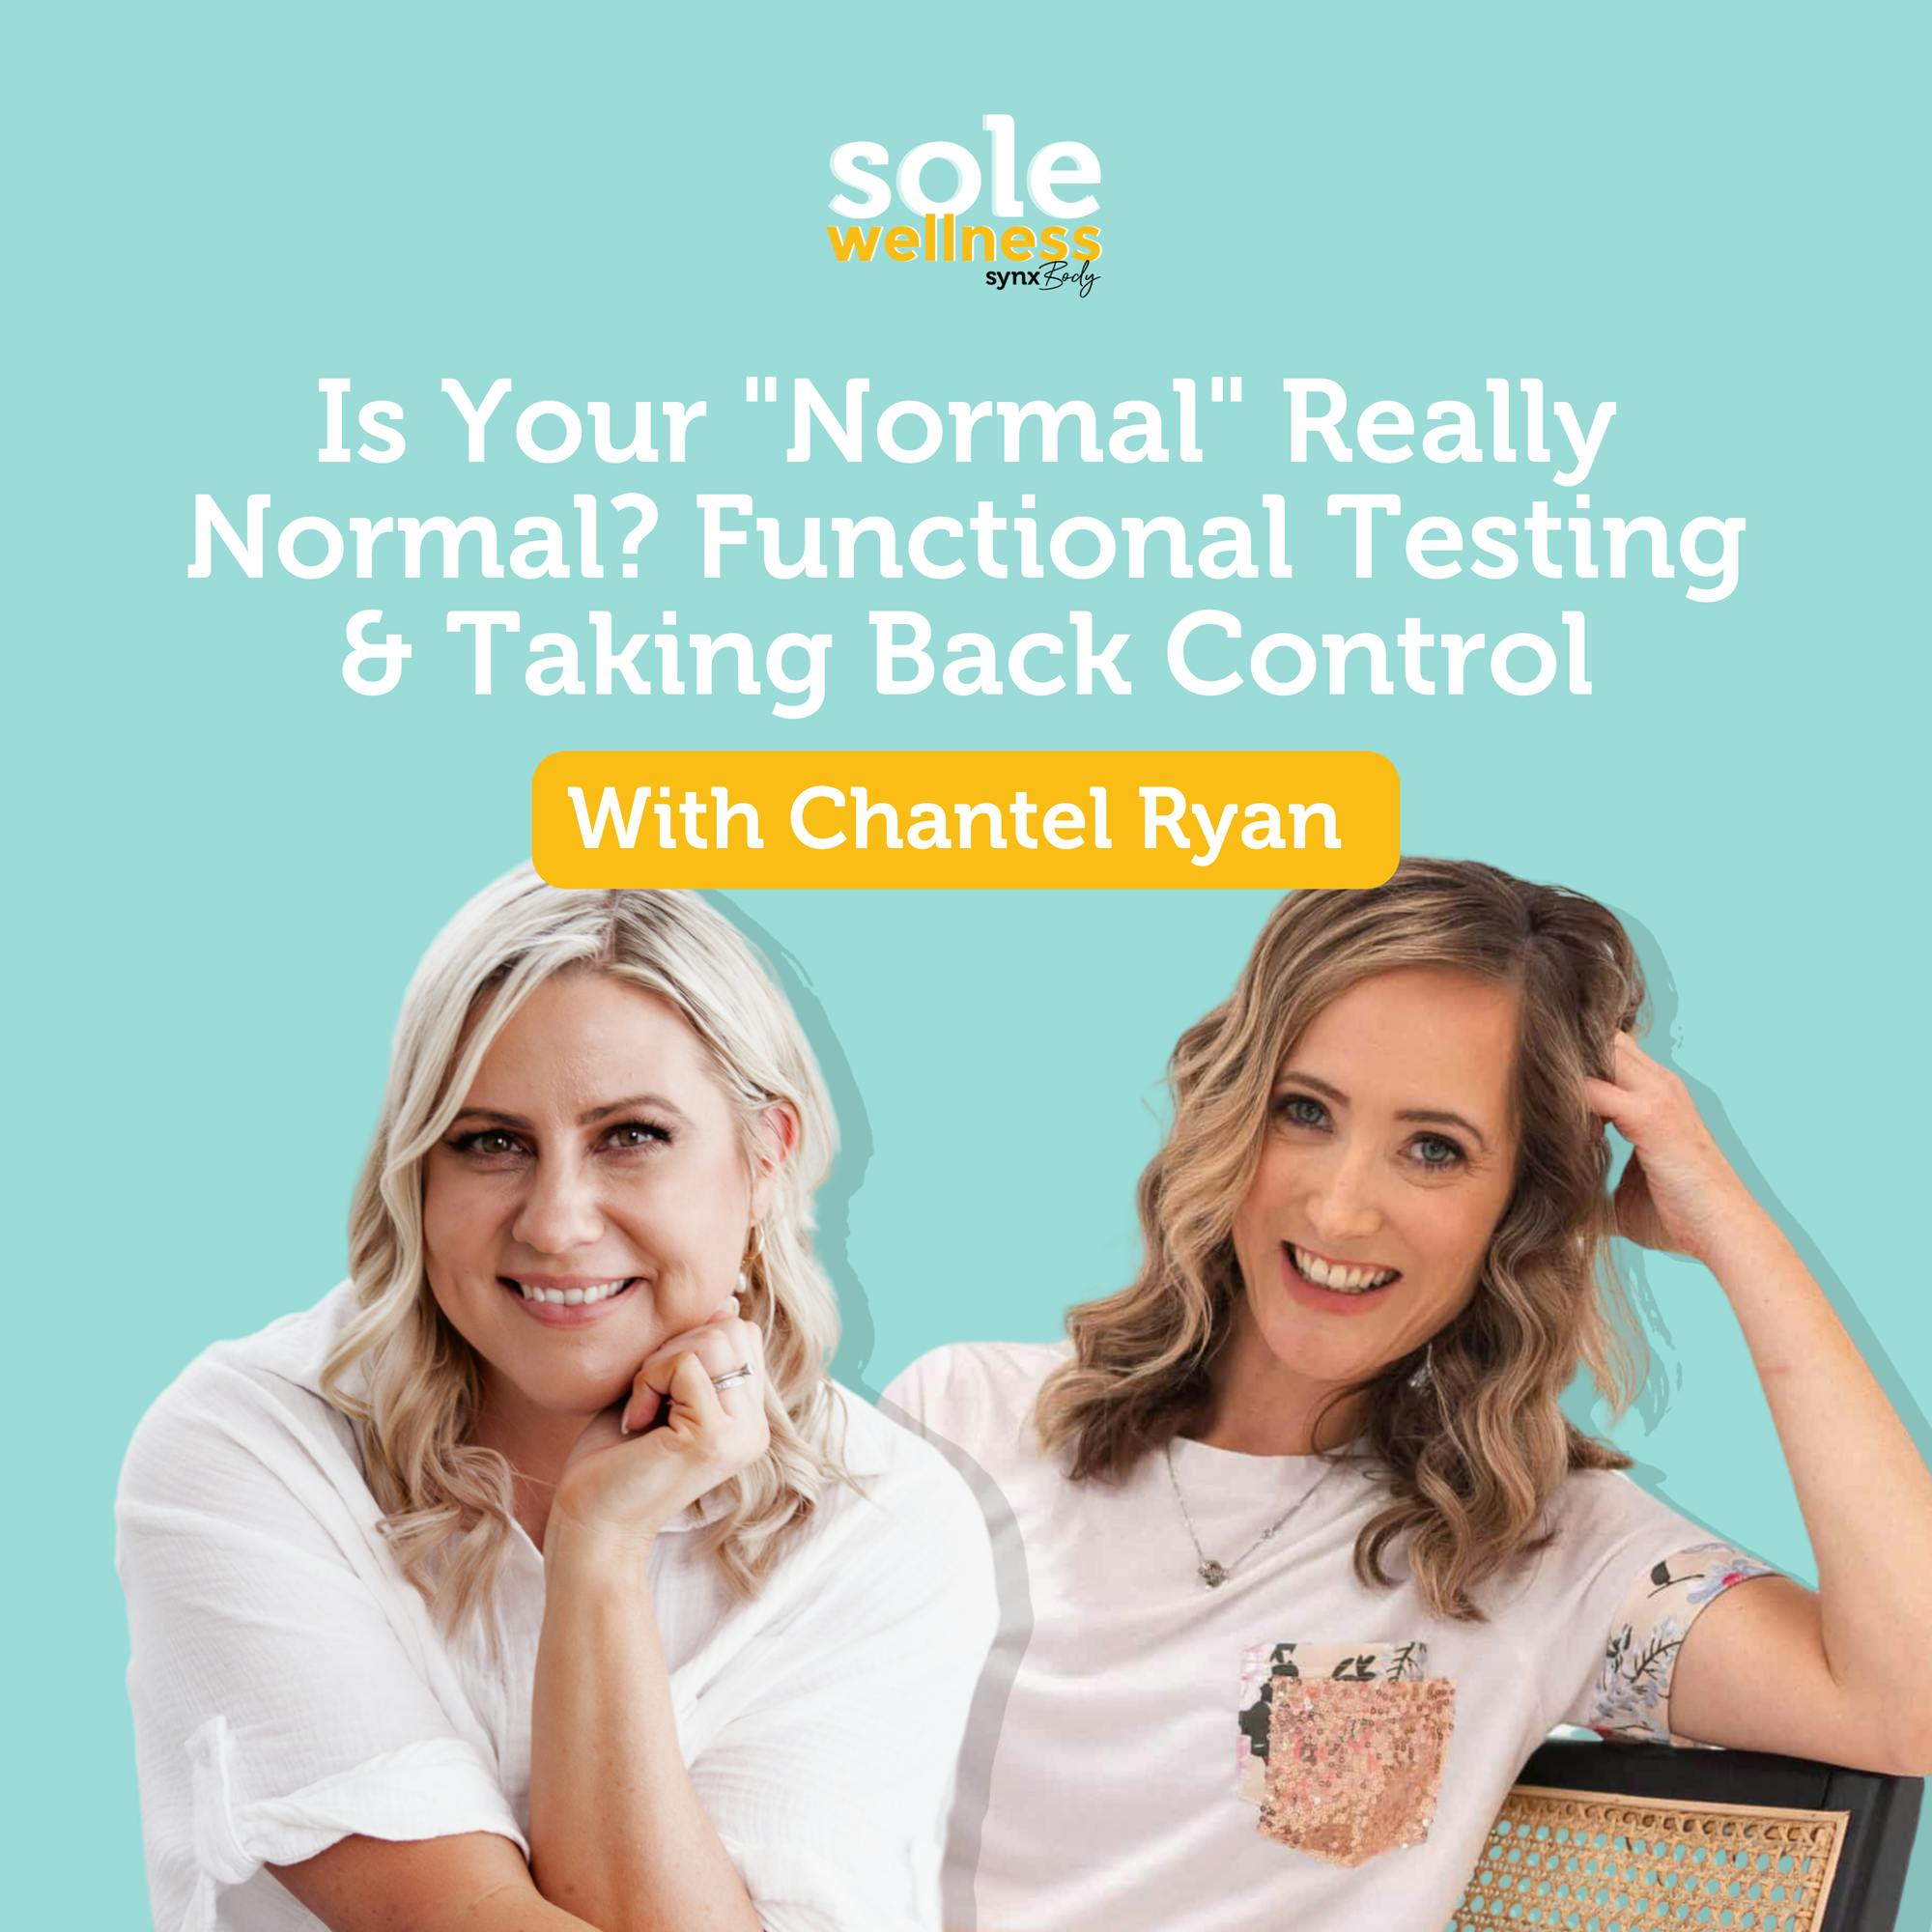 Is Your "Normal" Really Normal? Functional Testing & Taking Back Control with Chantel Ryan